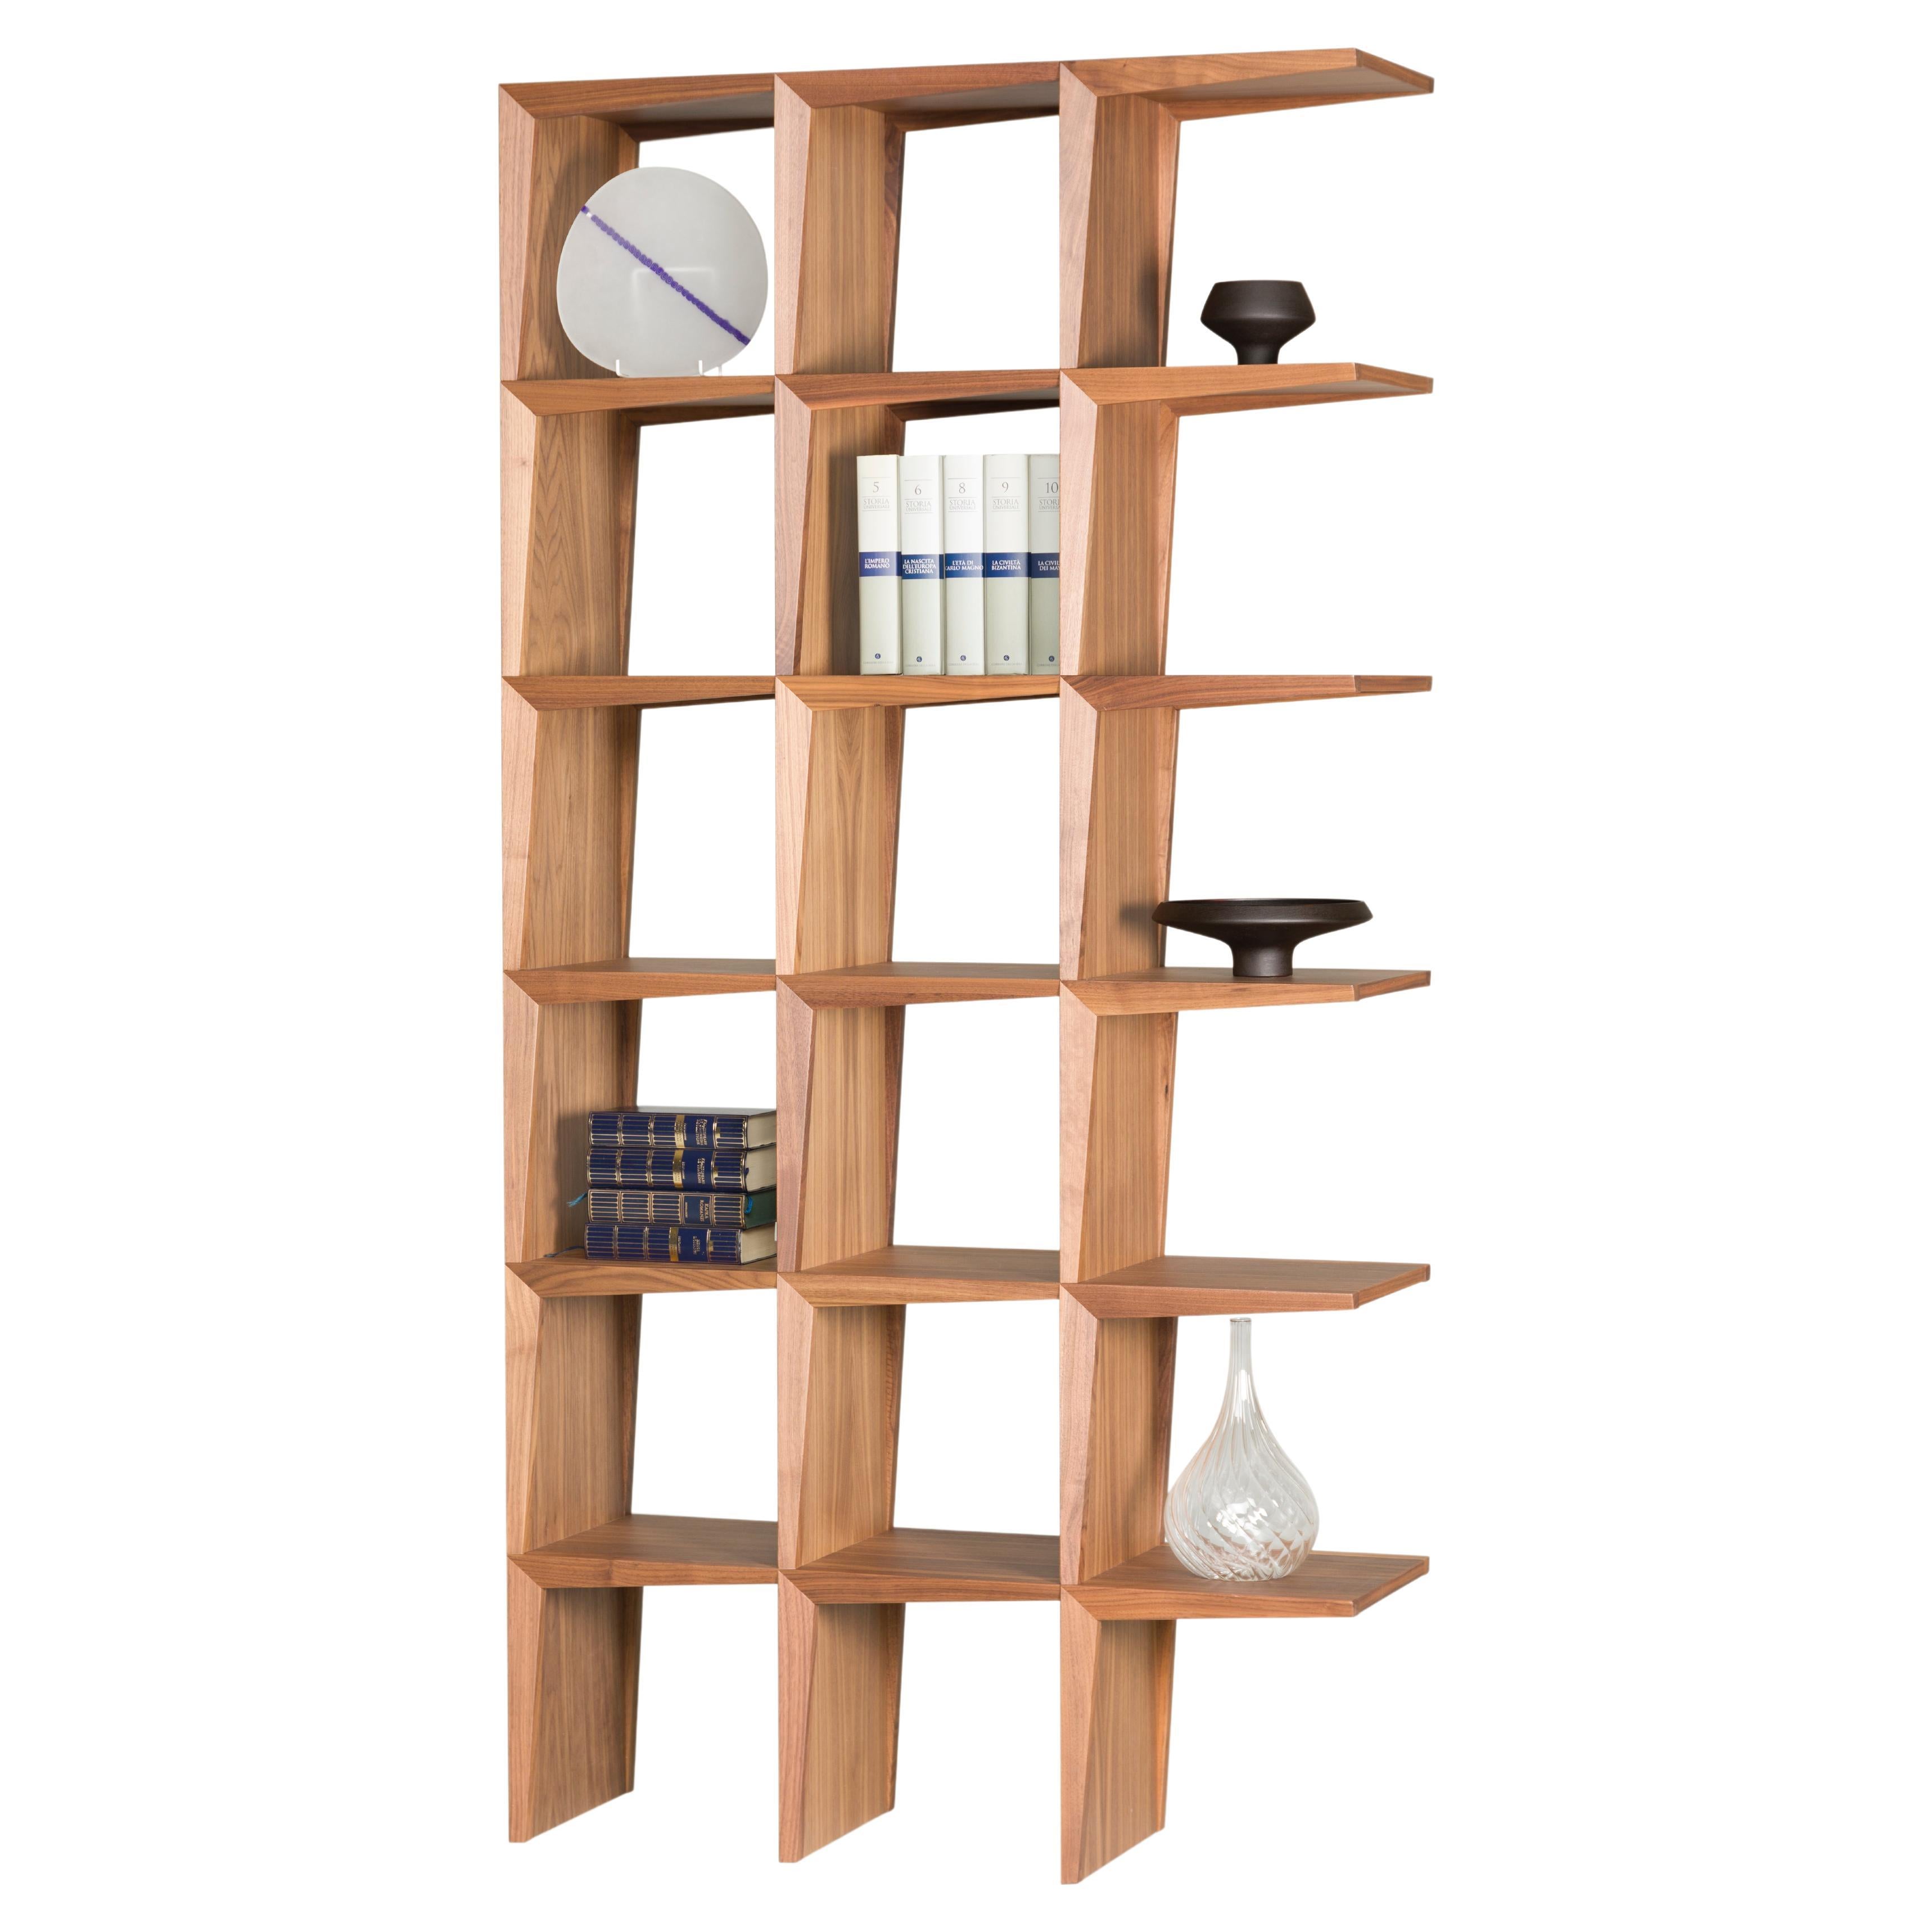 Kant, Freestanding Bookshelf Made of Canaletto Walnut Wood, by Morelato